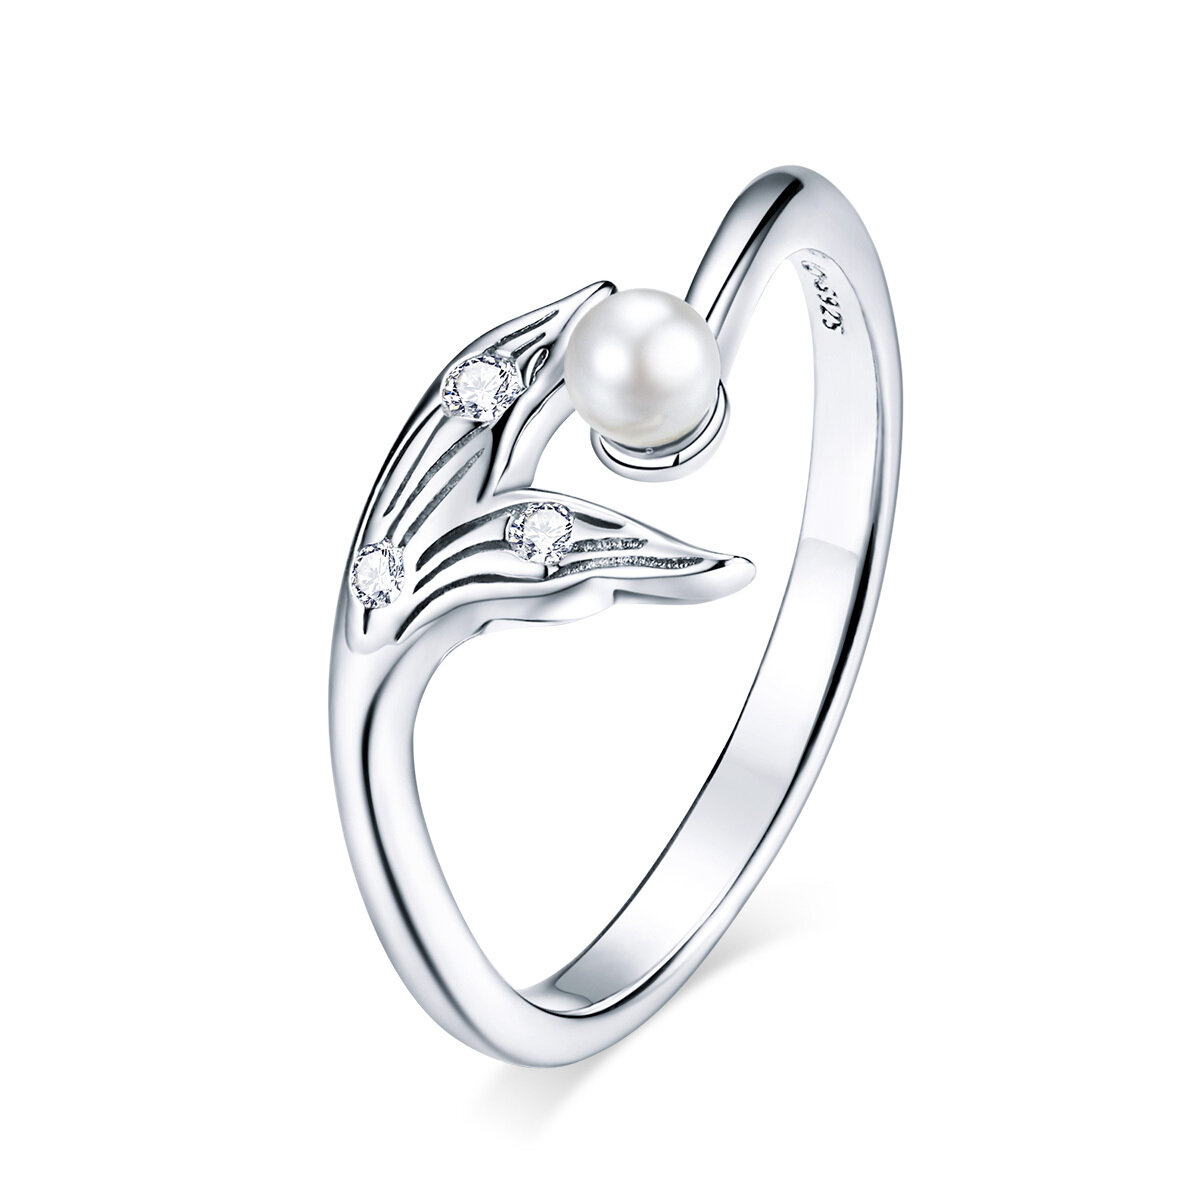 GemKing BSR124 fishtail Ring S925 Sterling Silver Ring